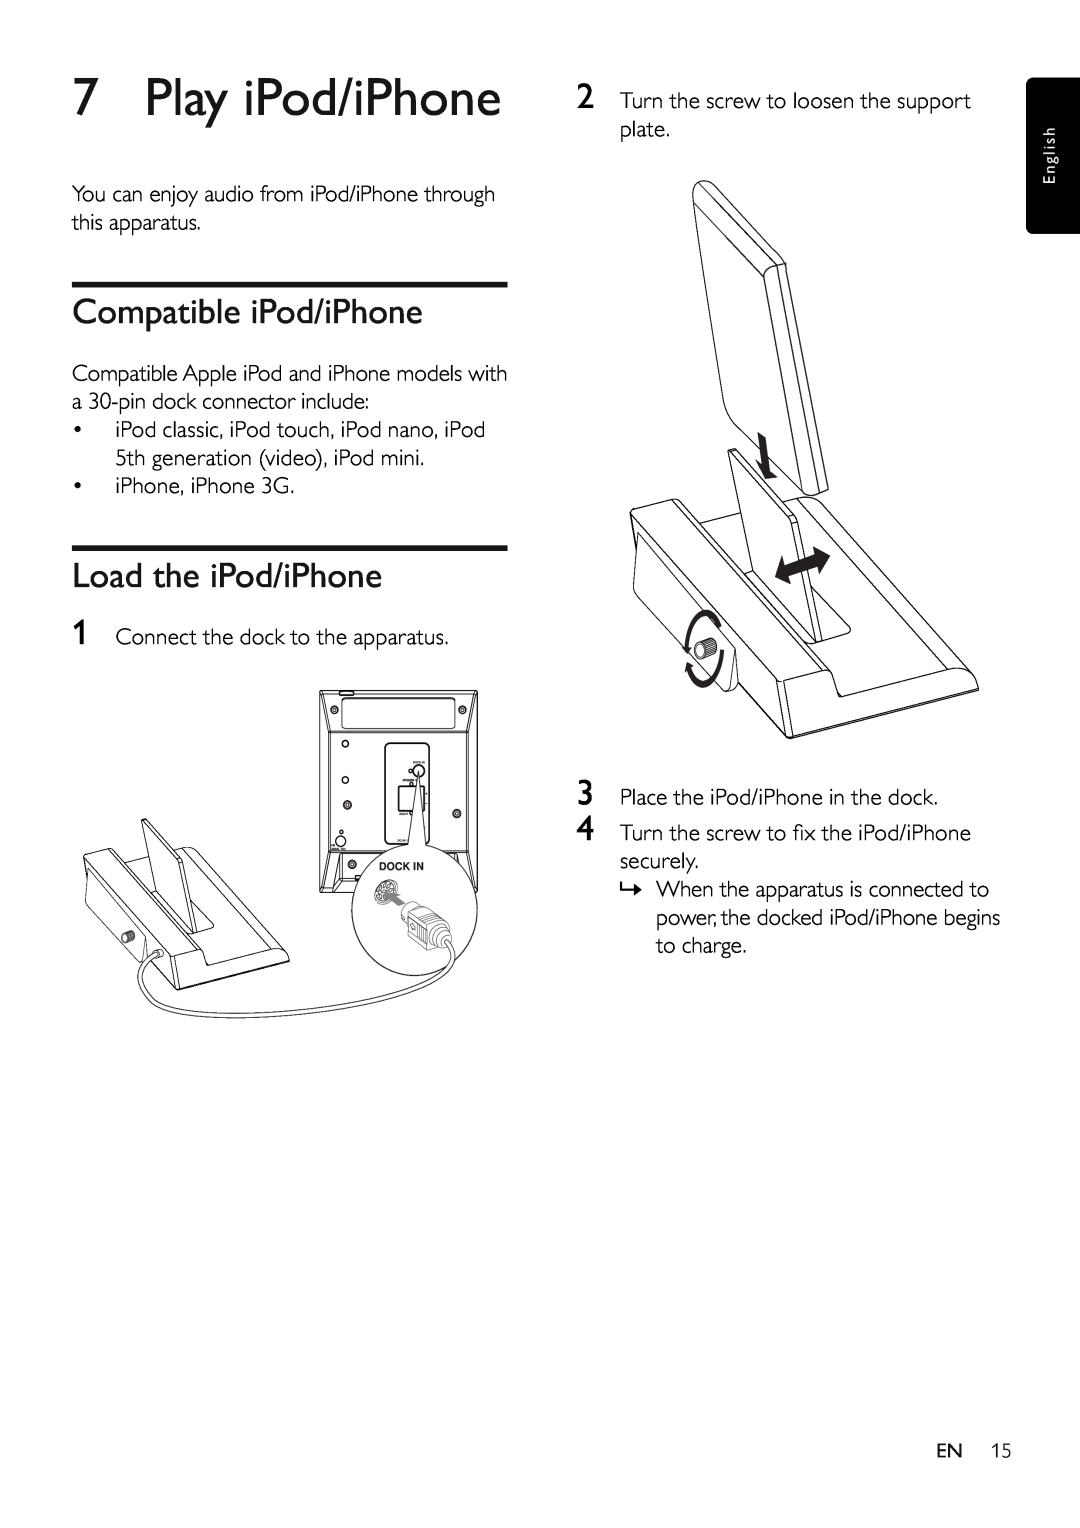 Philips MCM280D/12 user manual Play iPod/iPhone, Compatible iPod/iPhone, Load the iPod/iPhone 